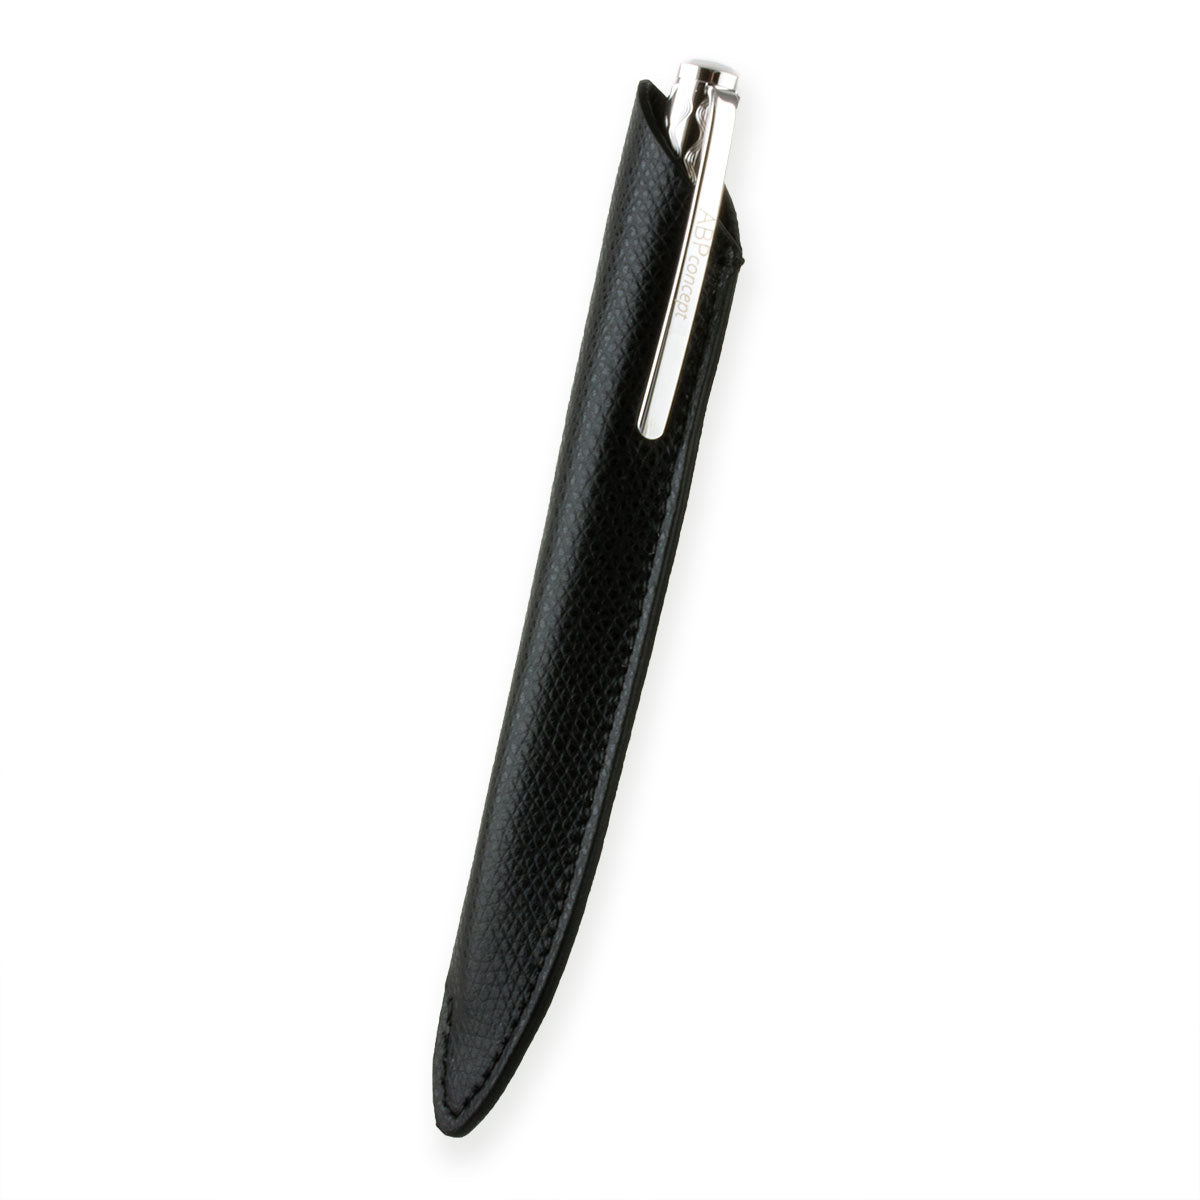 "Essential" Ballpoint pen leather case - Rhodium steel, gold colored steel or black PVD finish - Grained calf